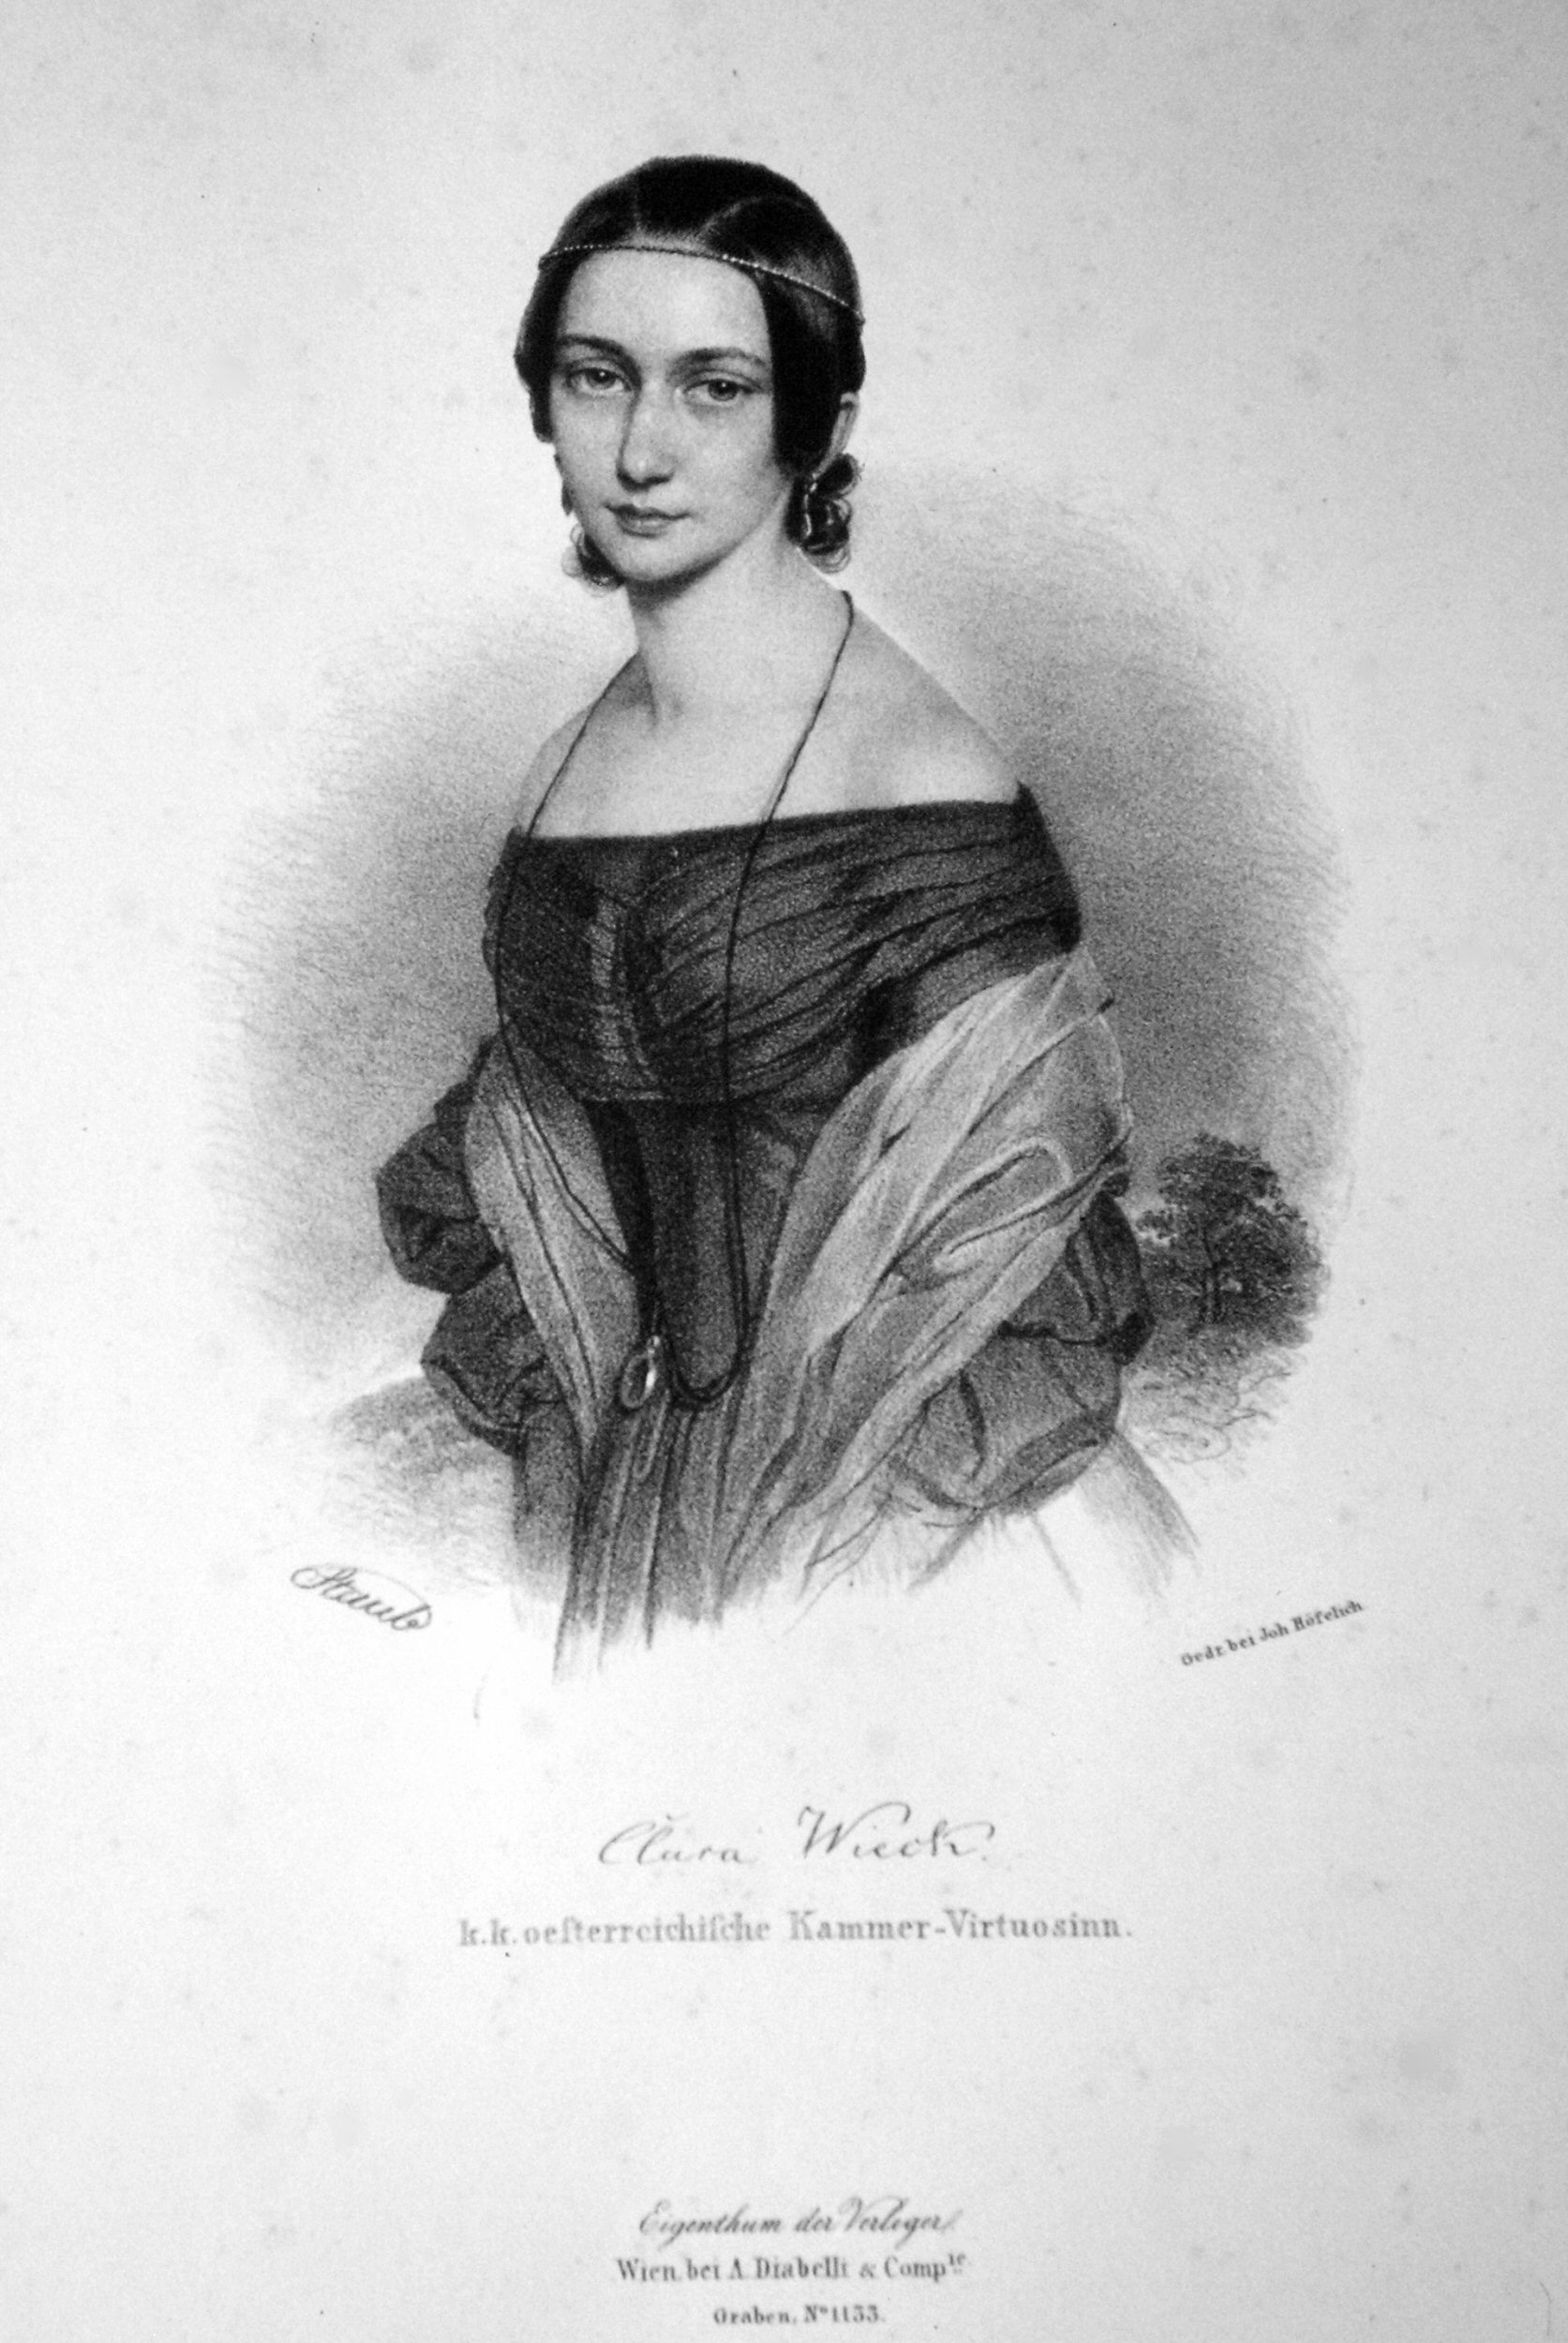 Lithograph by [[Andreas Staub]], 1839